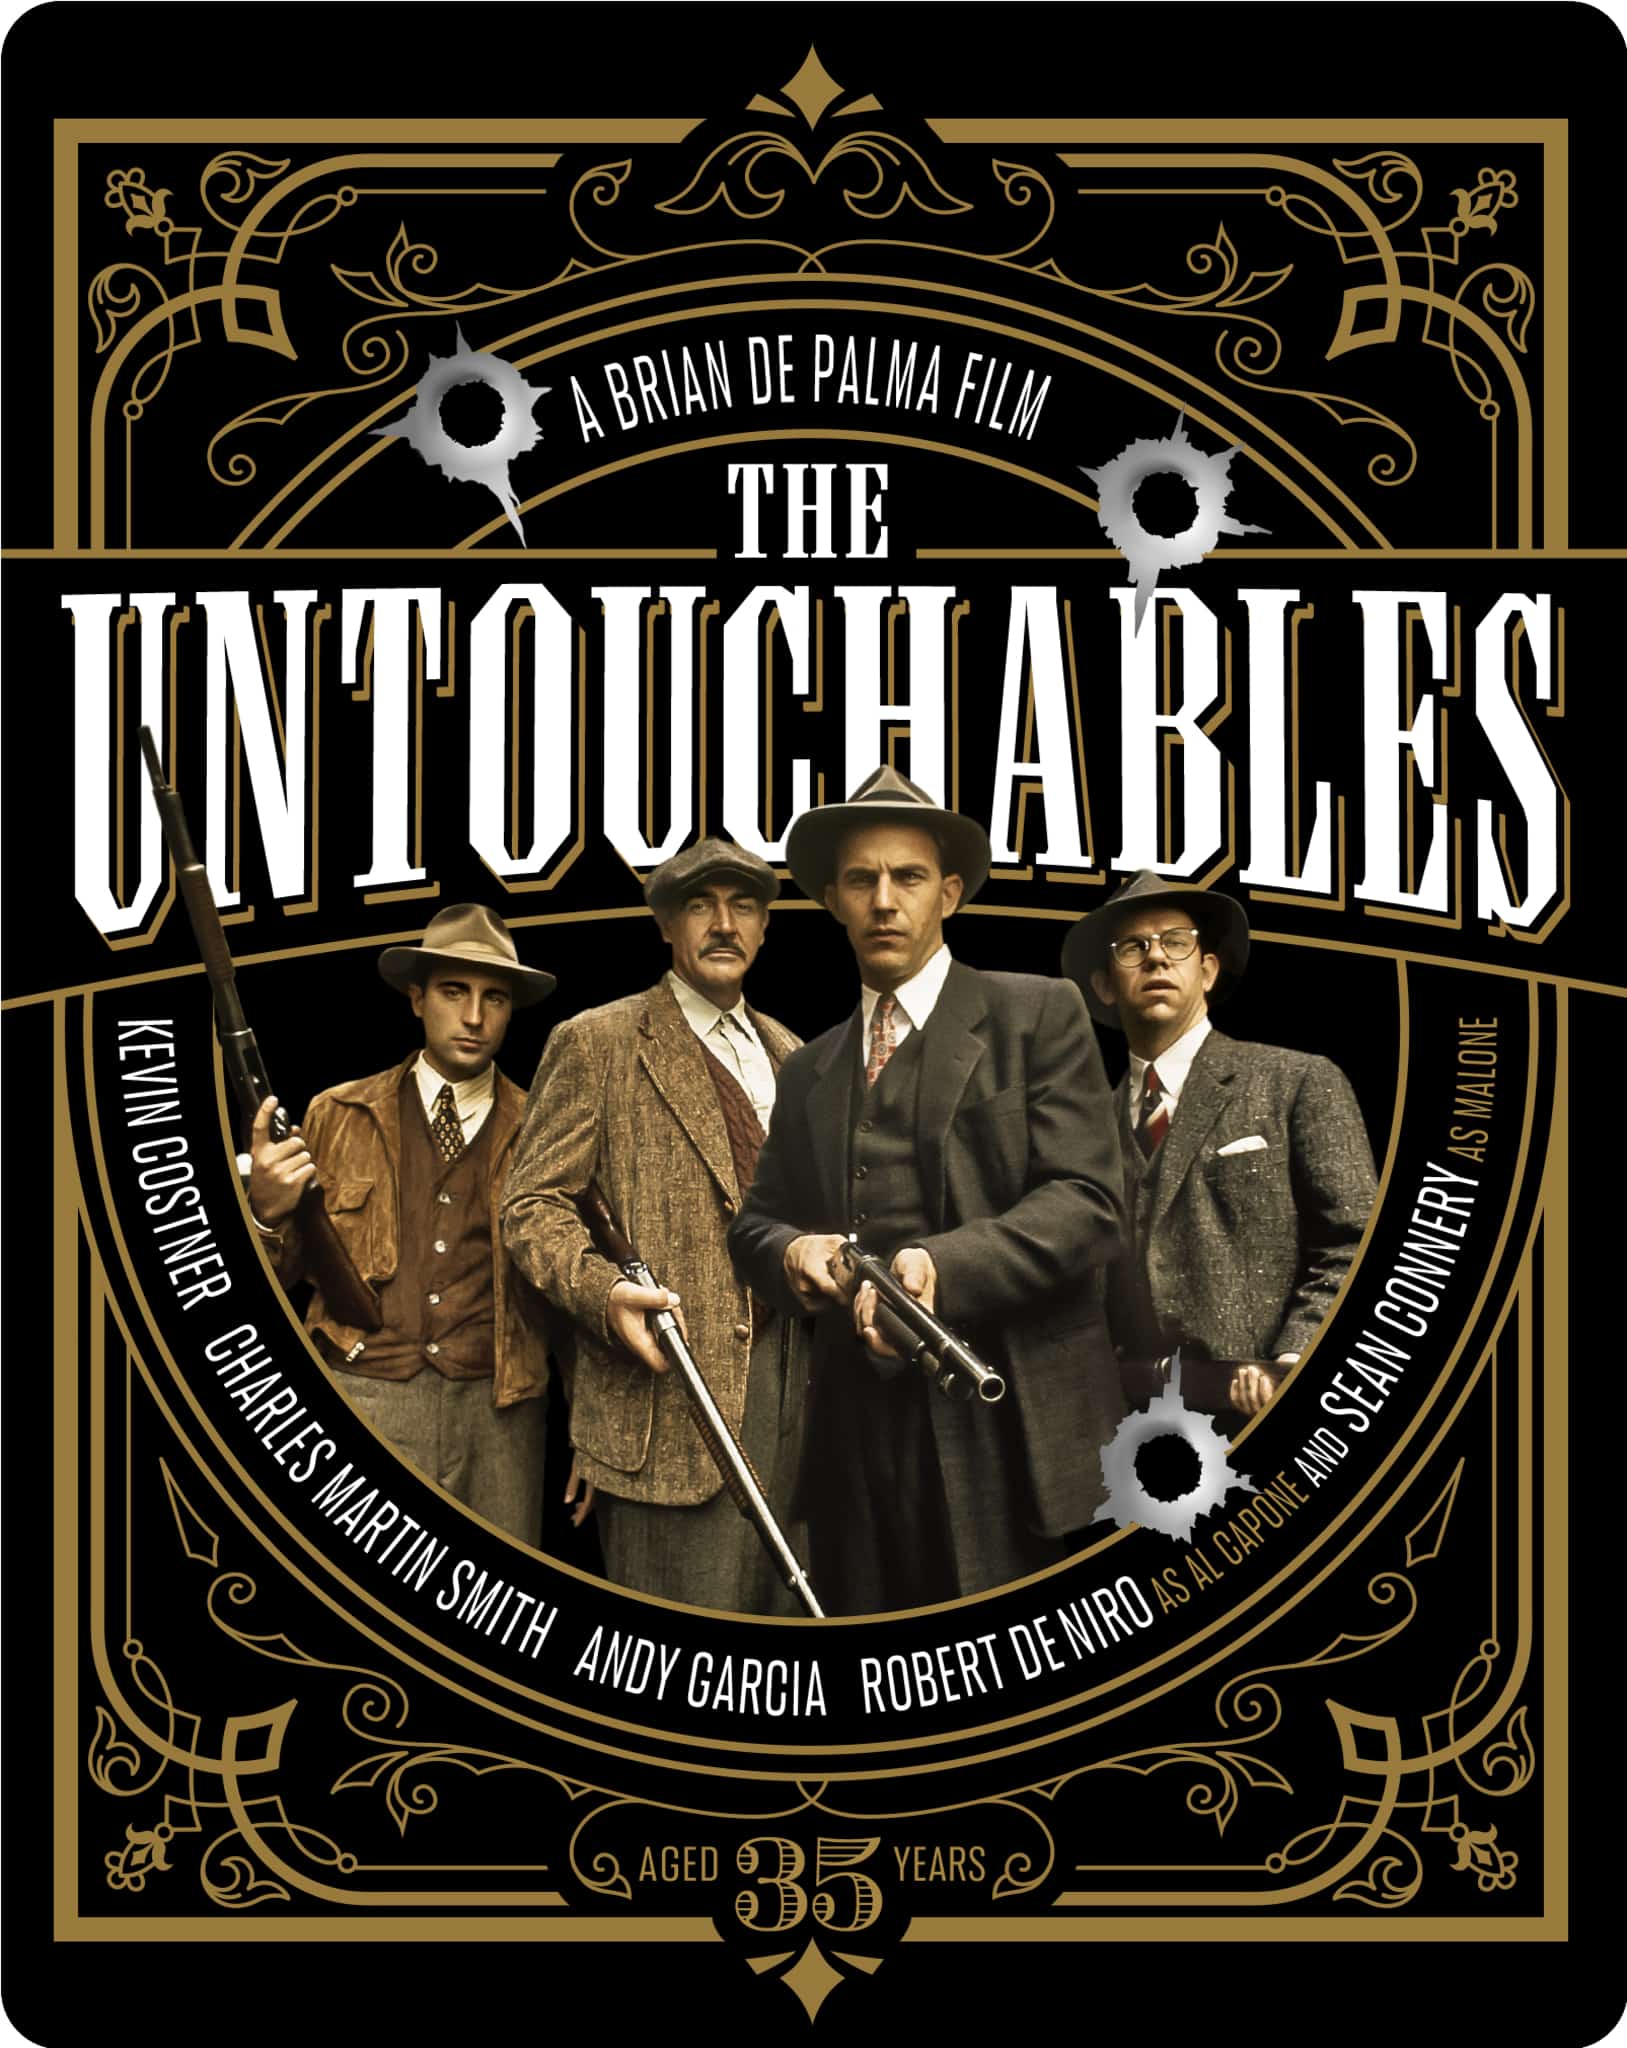 The Untouchables debuts on 4K UHD on May 31st 19